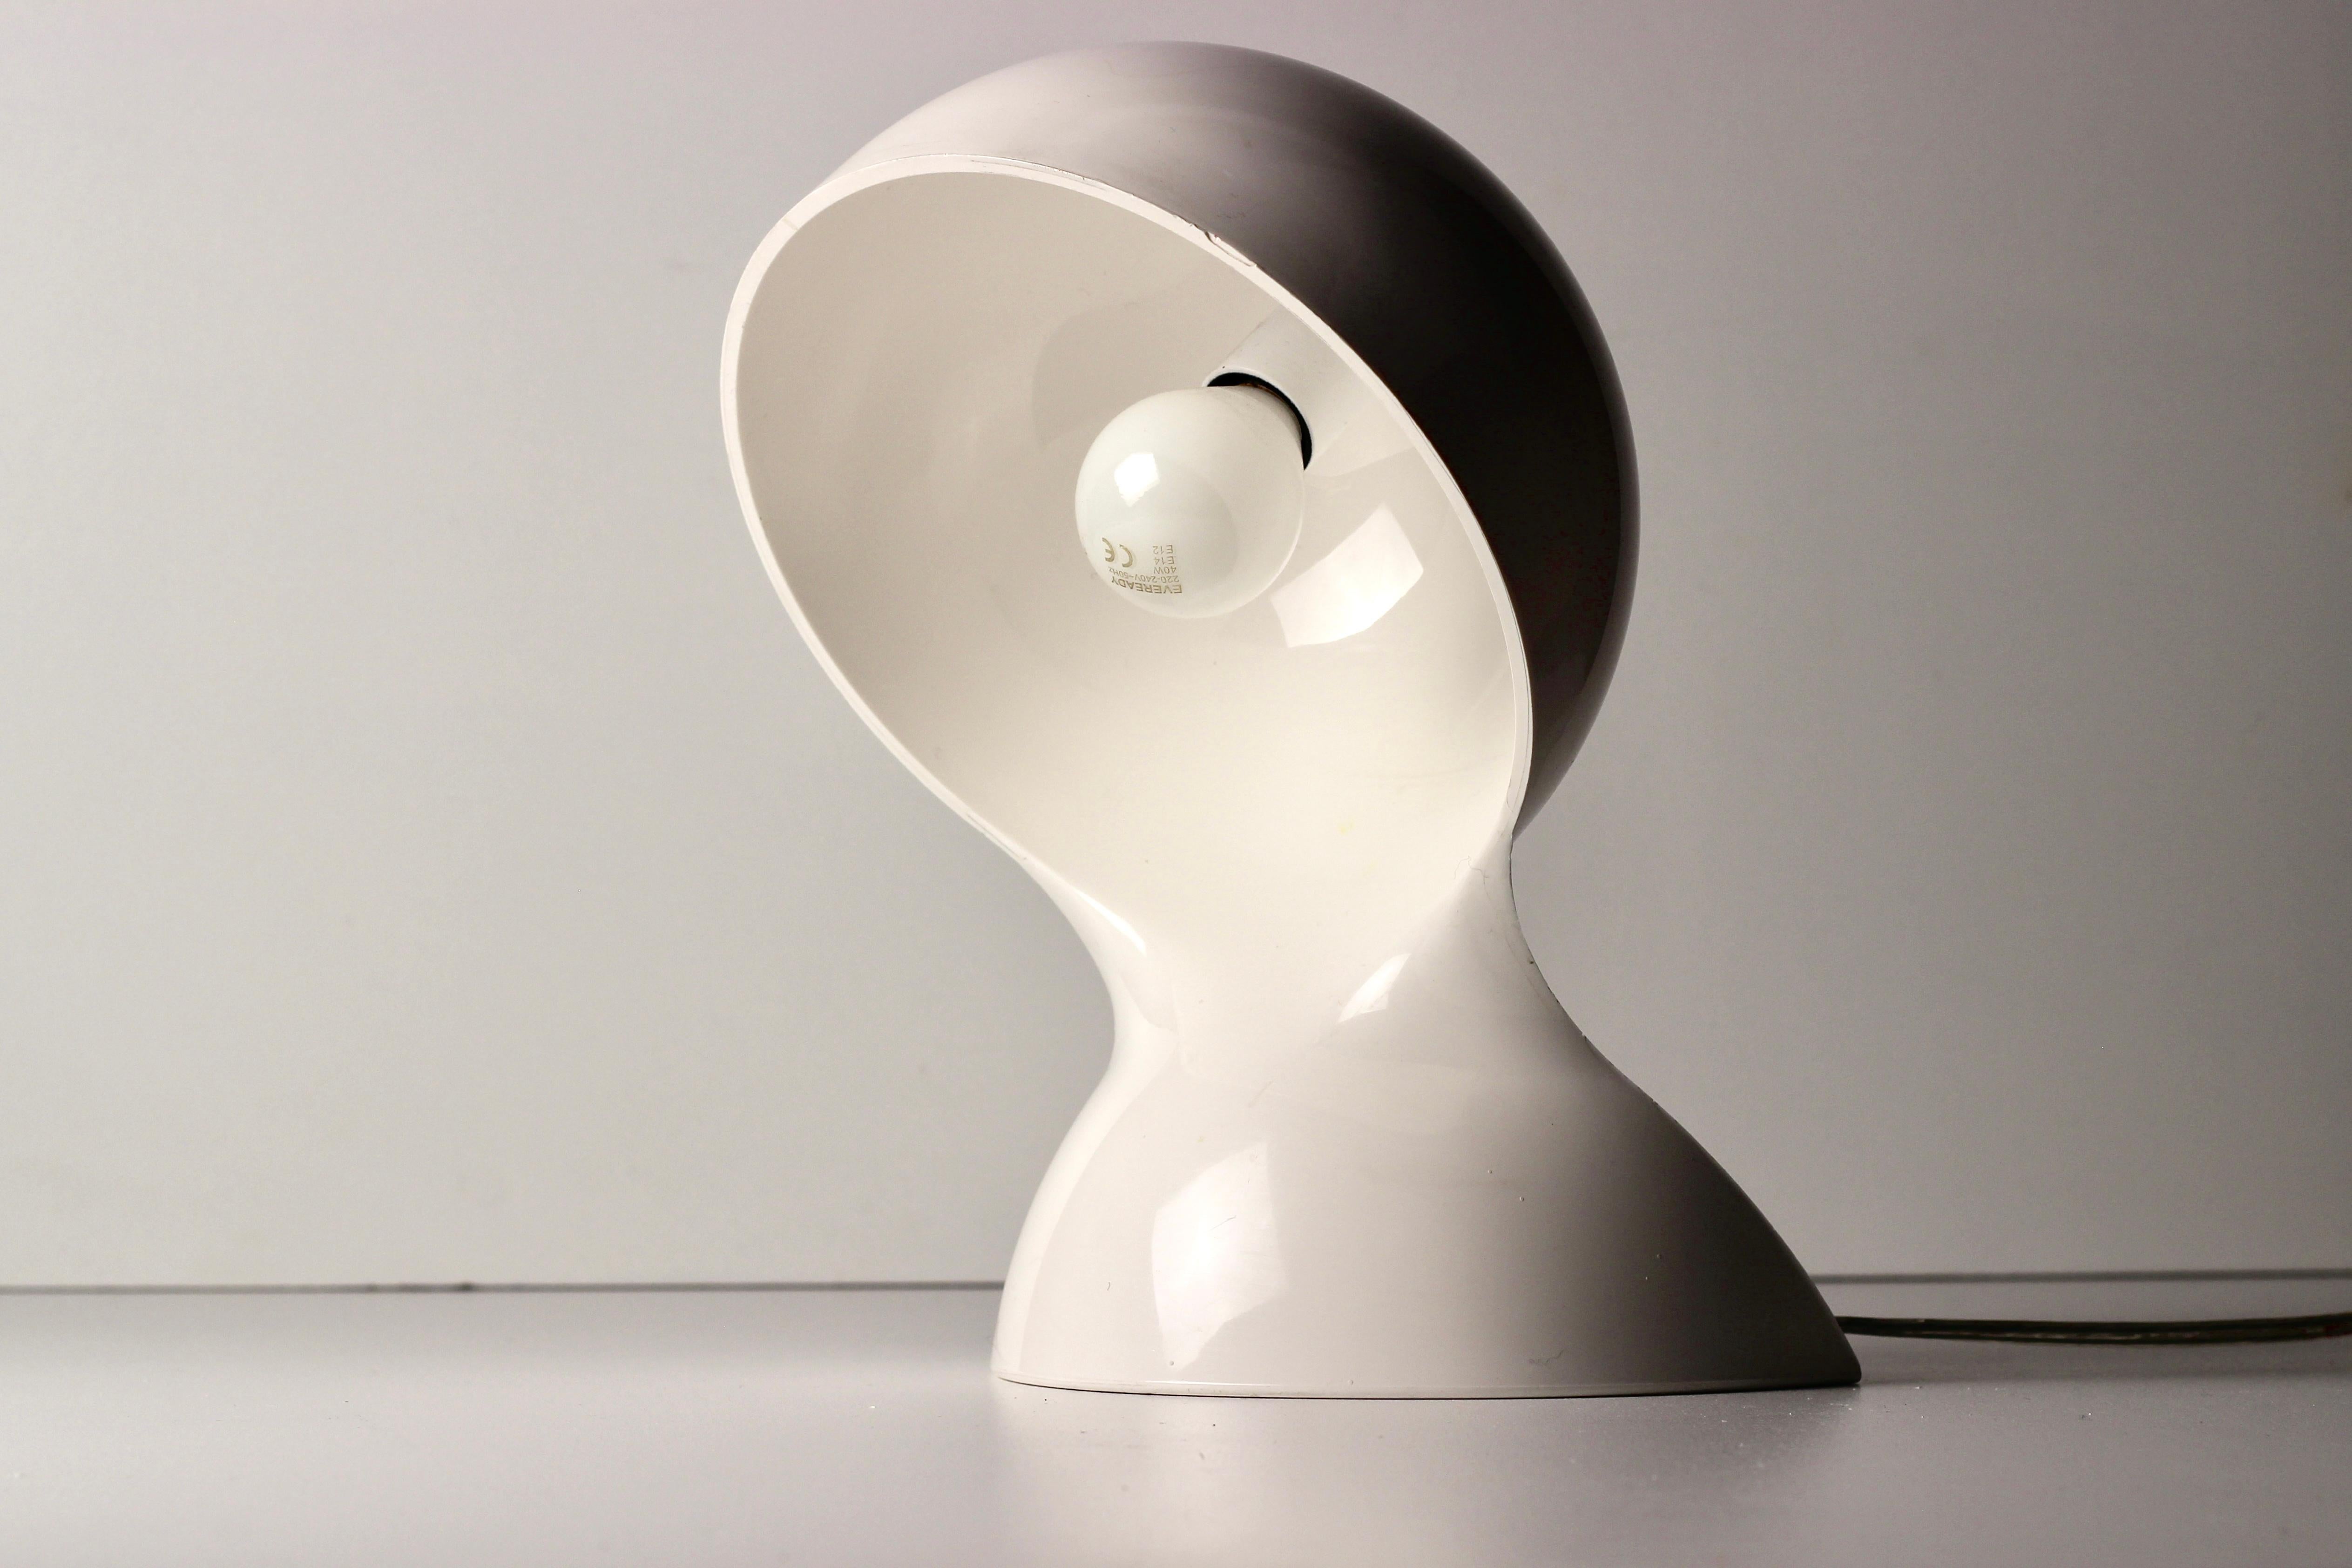 This rare table lamp was designed by Vico Magistretti for the Italian manufacture Artemide during the 1960s, it is one of 2 that we currently have in stock. The lamp is made from one main piece of white plastic. Dalù is one a wonderful expression of